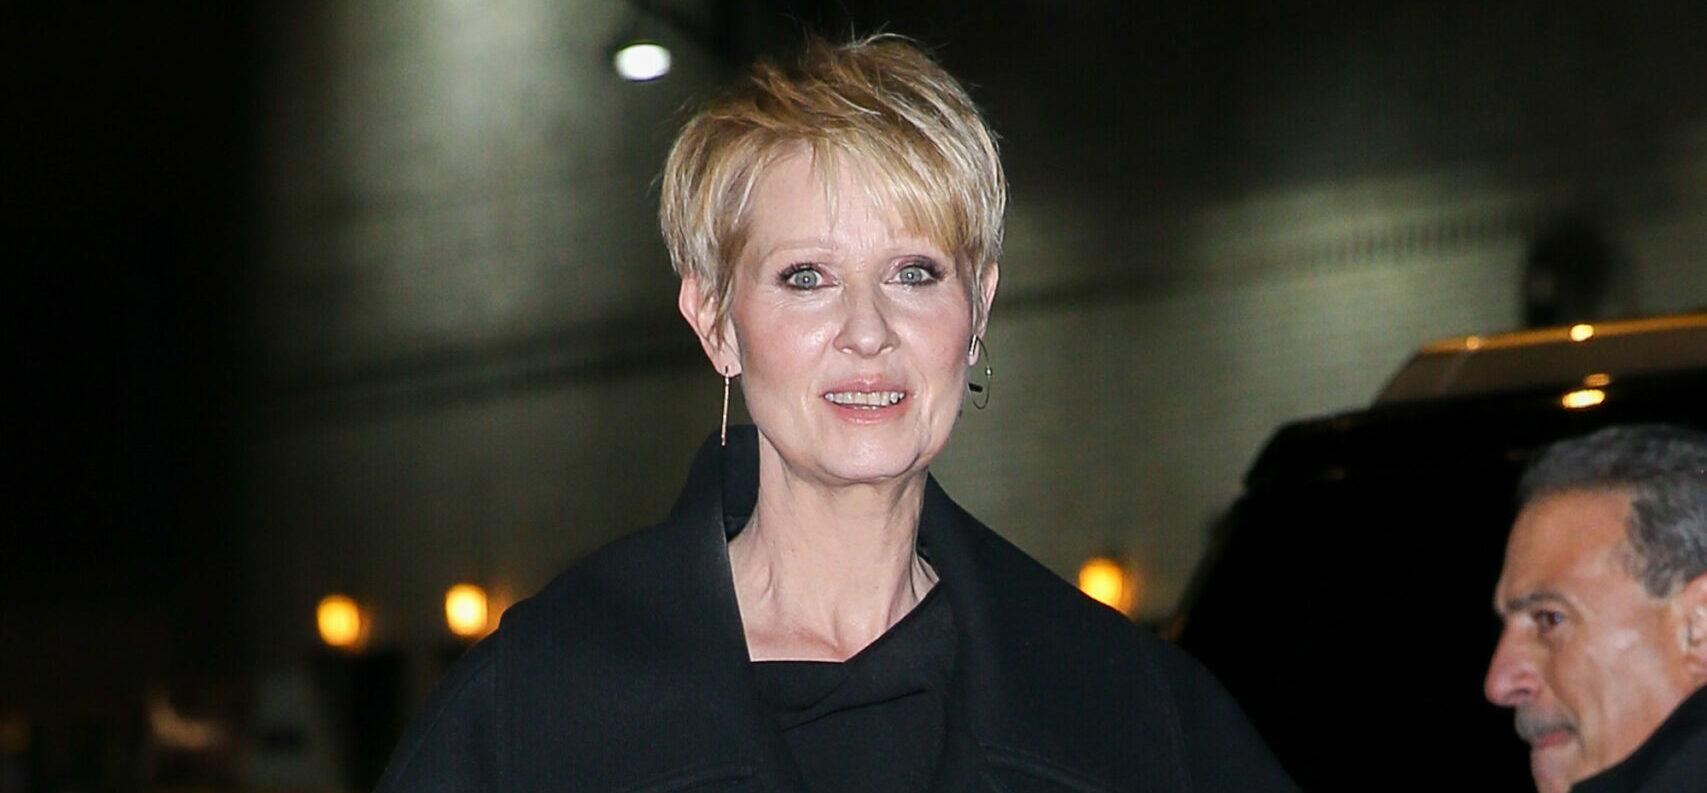 Cynthia Nixon seen posing outside The Late Show With Stephen Colbert in New York City